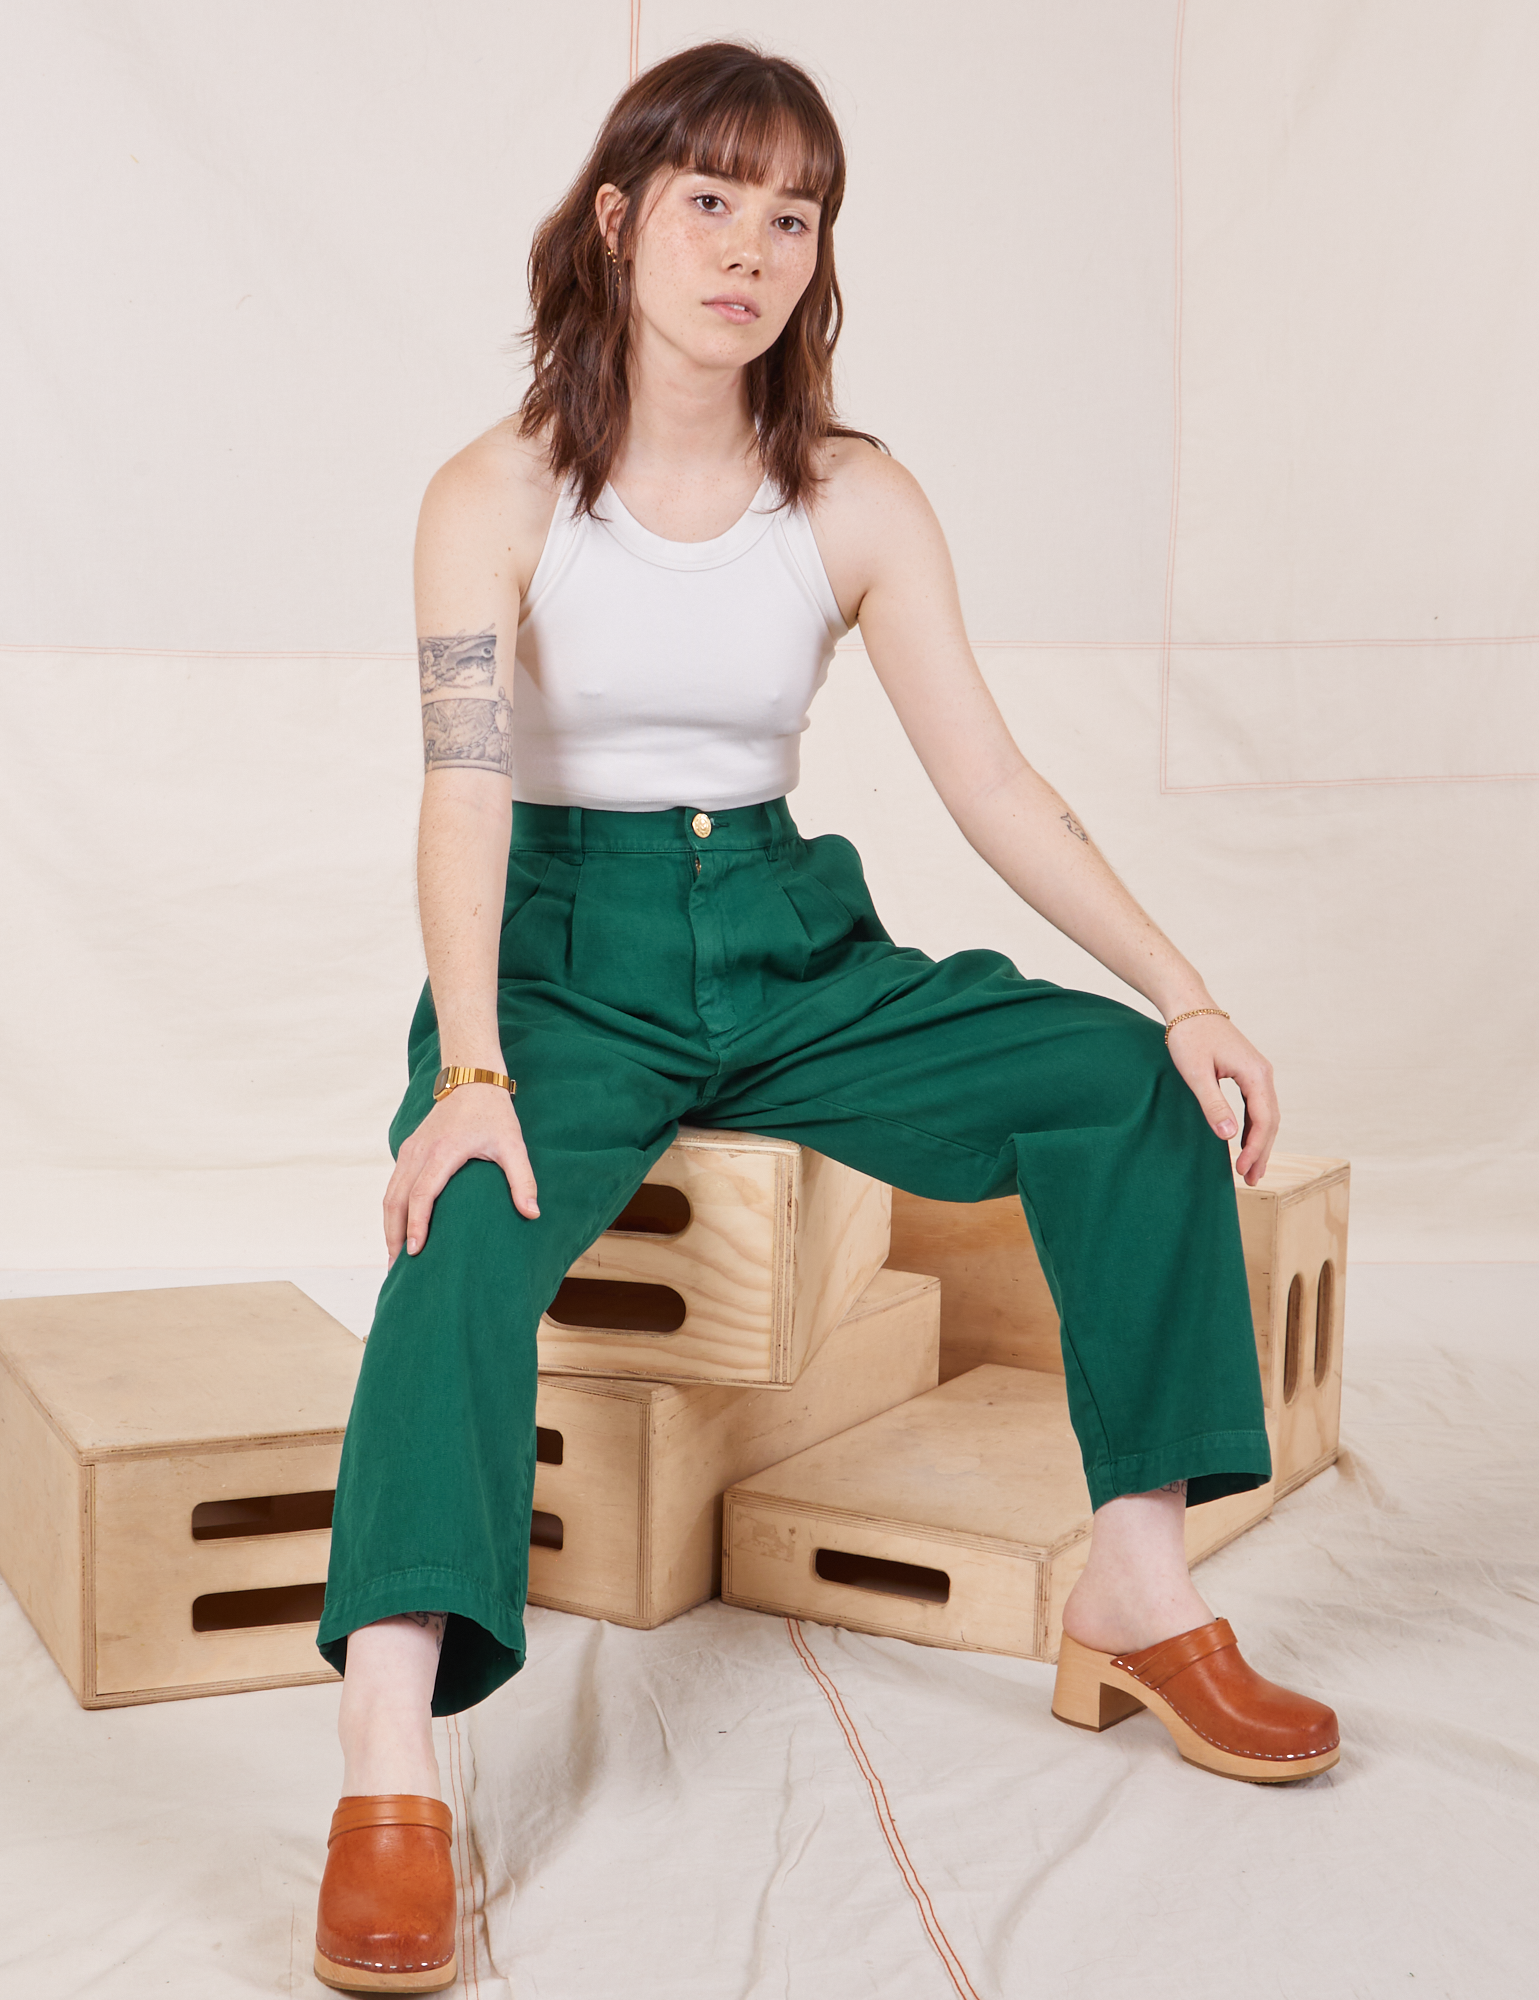 Hana is wearing Heavyweight Trousers in Hunter Green and Halter Top in vintage tee off-white